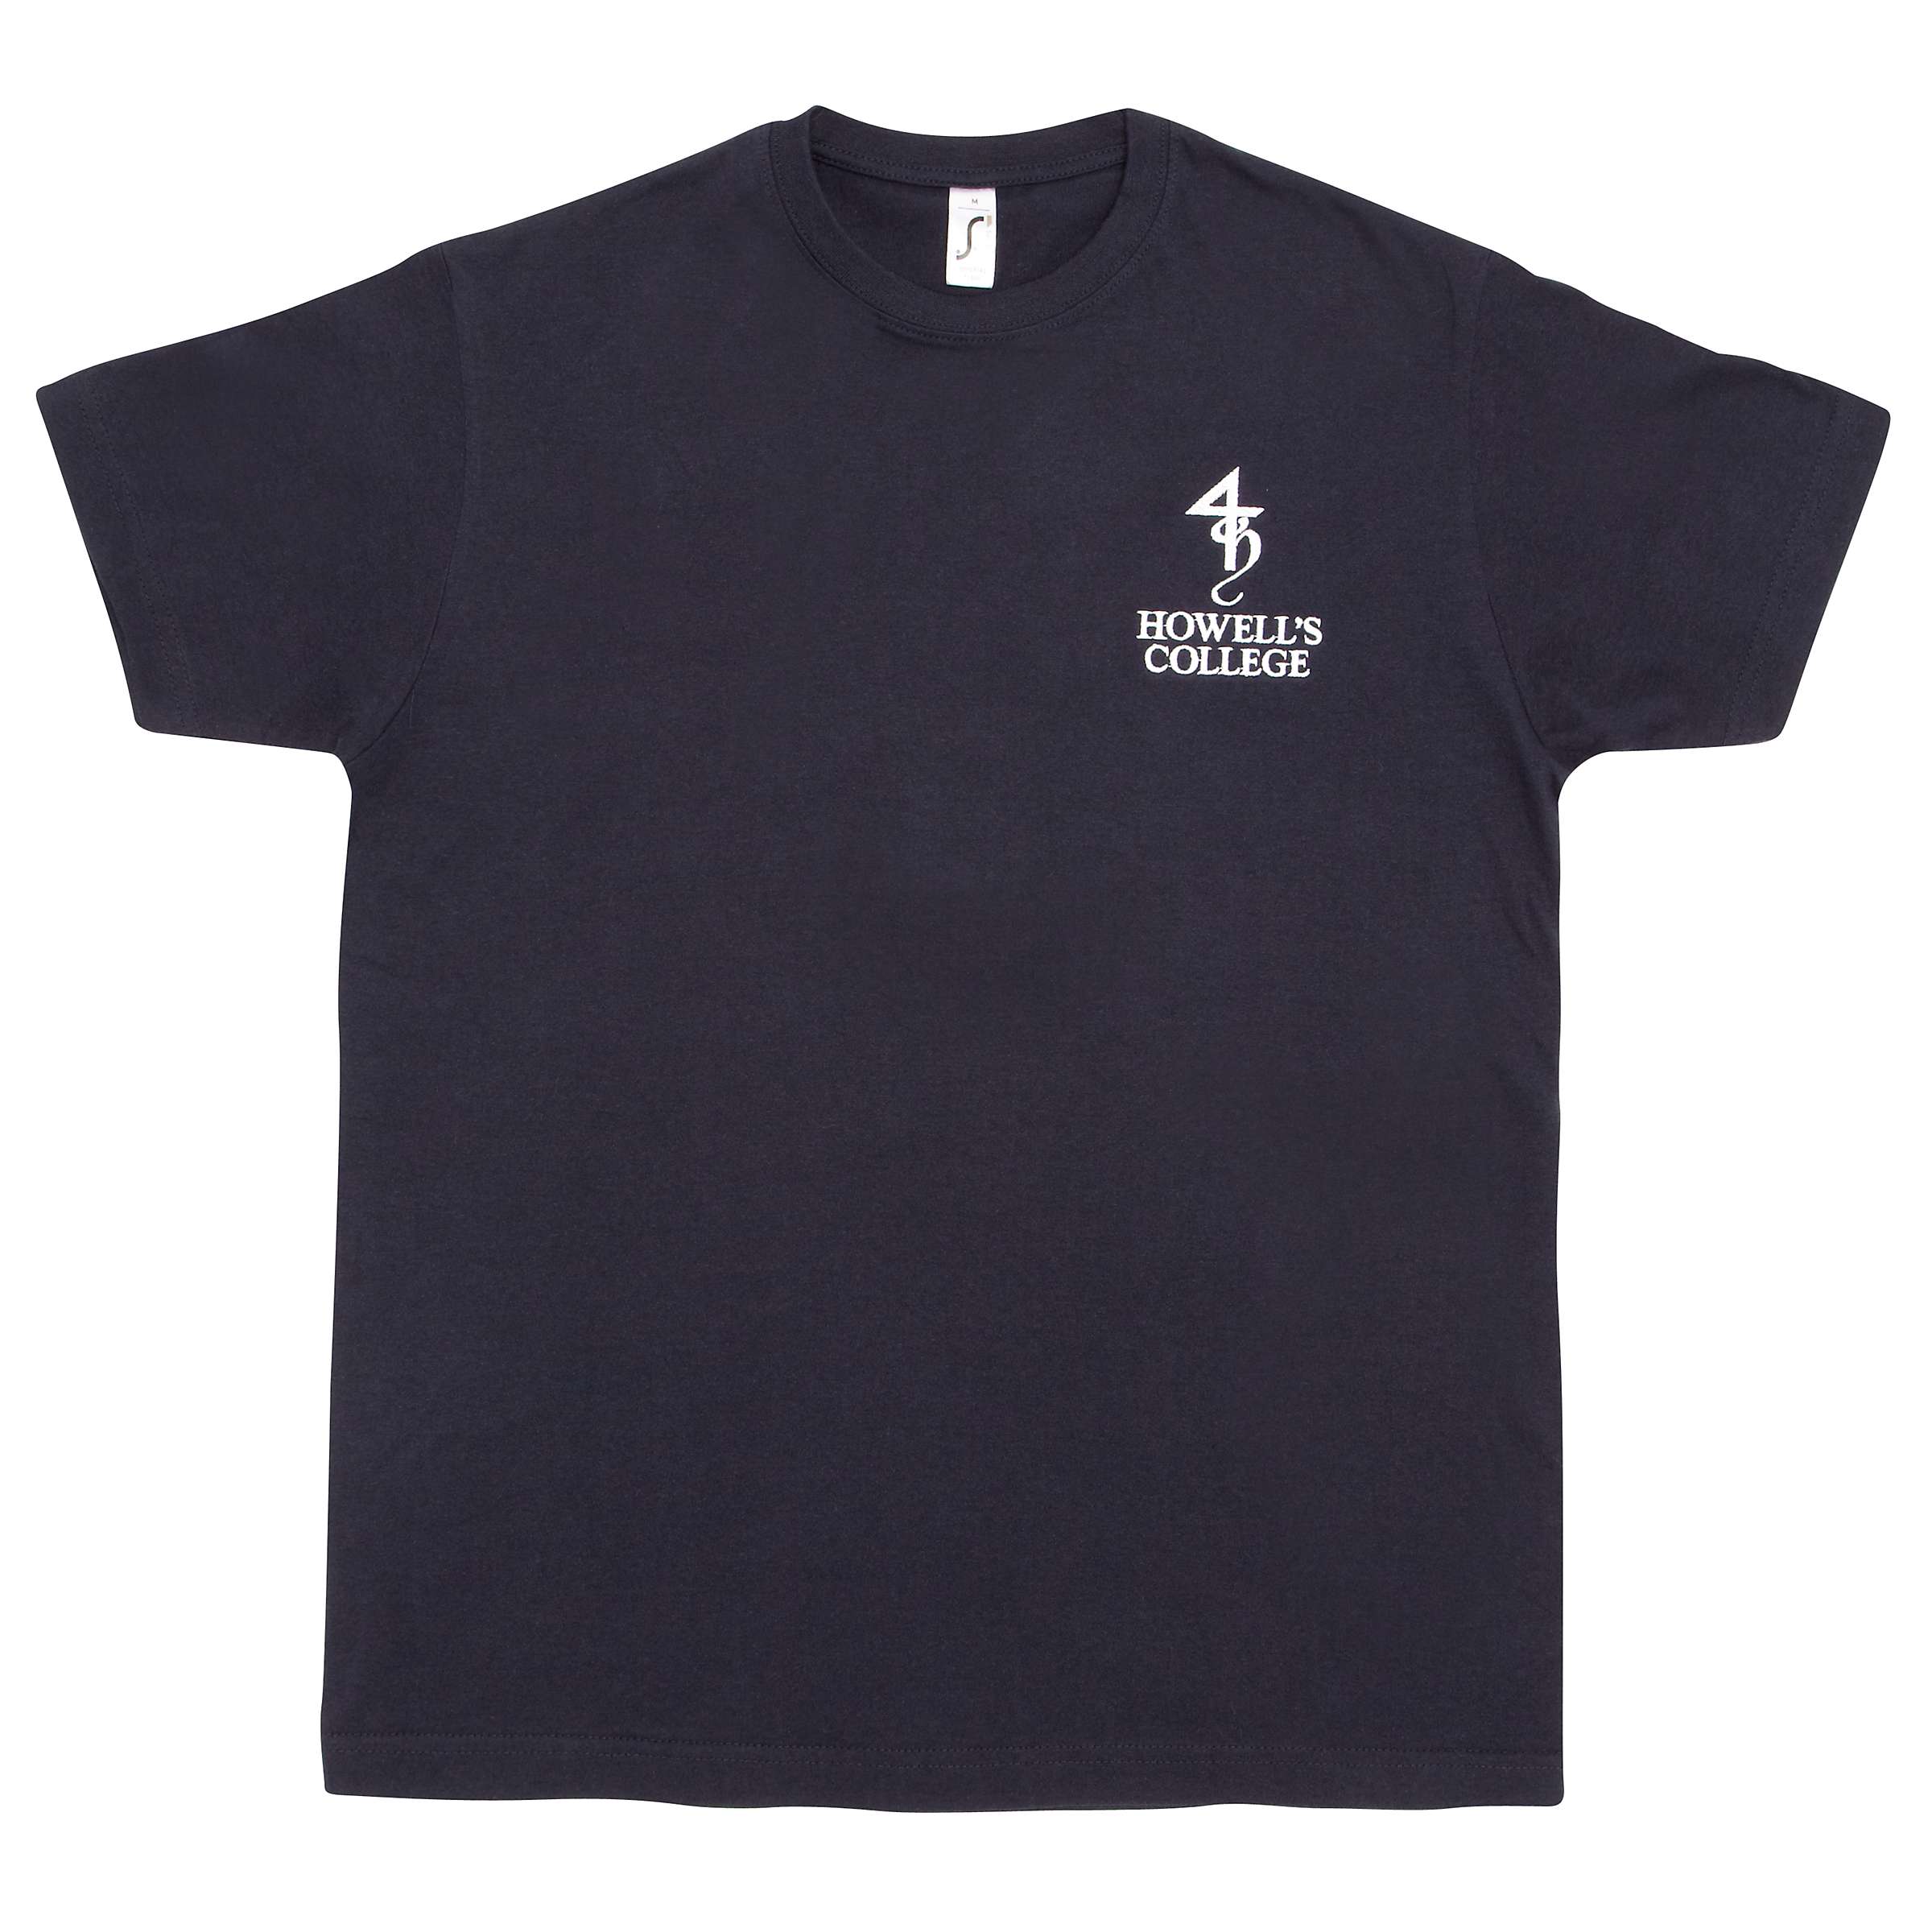 Buy Howell's College Unisex T-Shirt, Navy Online at johnlewis.com